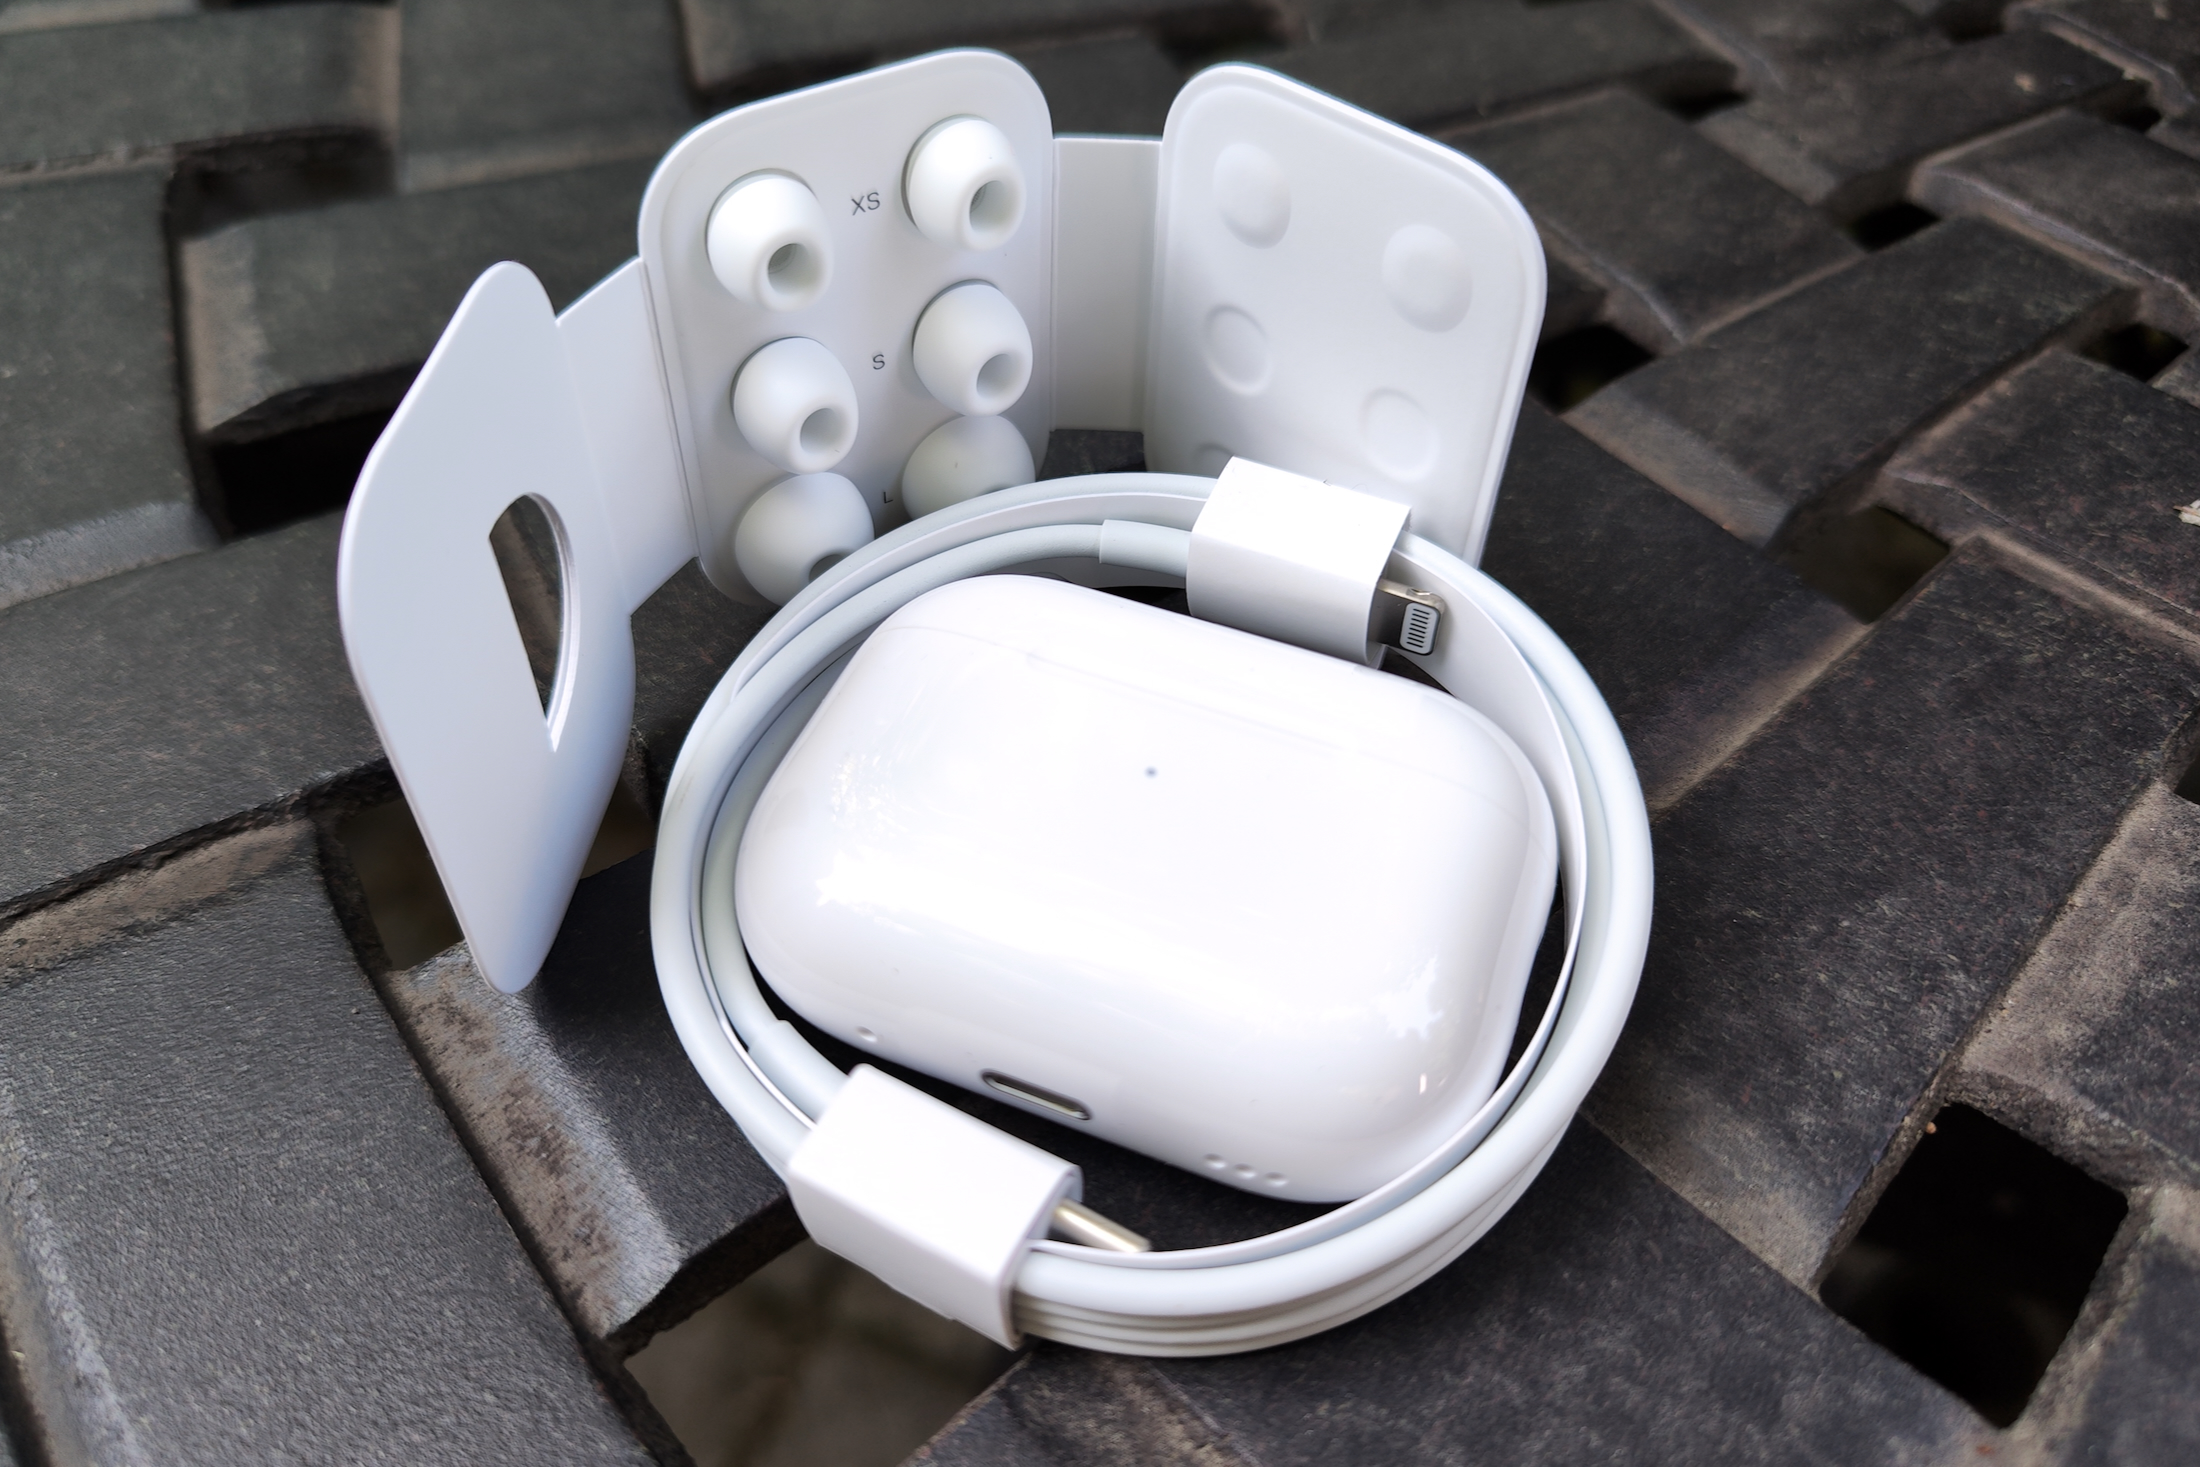 AirPods Pro: Recently Launched! New H2 Chip and Better Battery Life